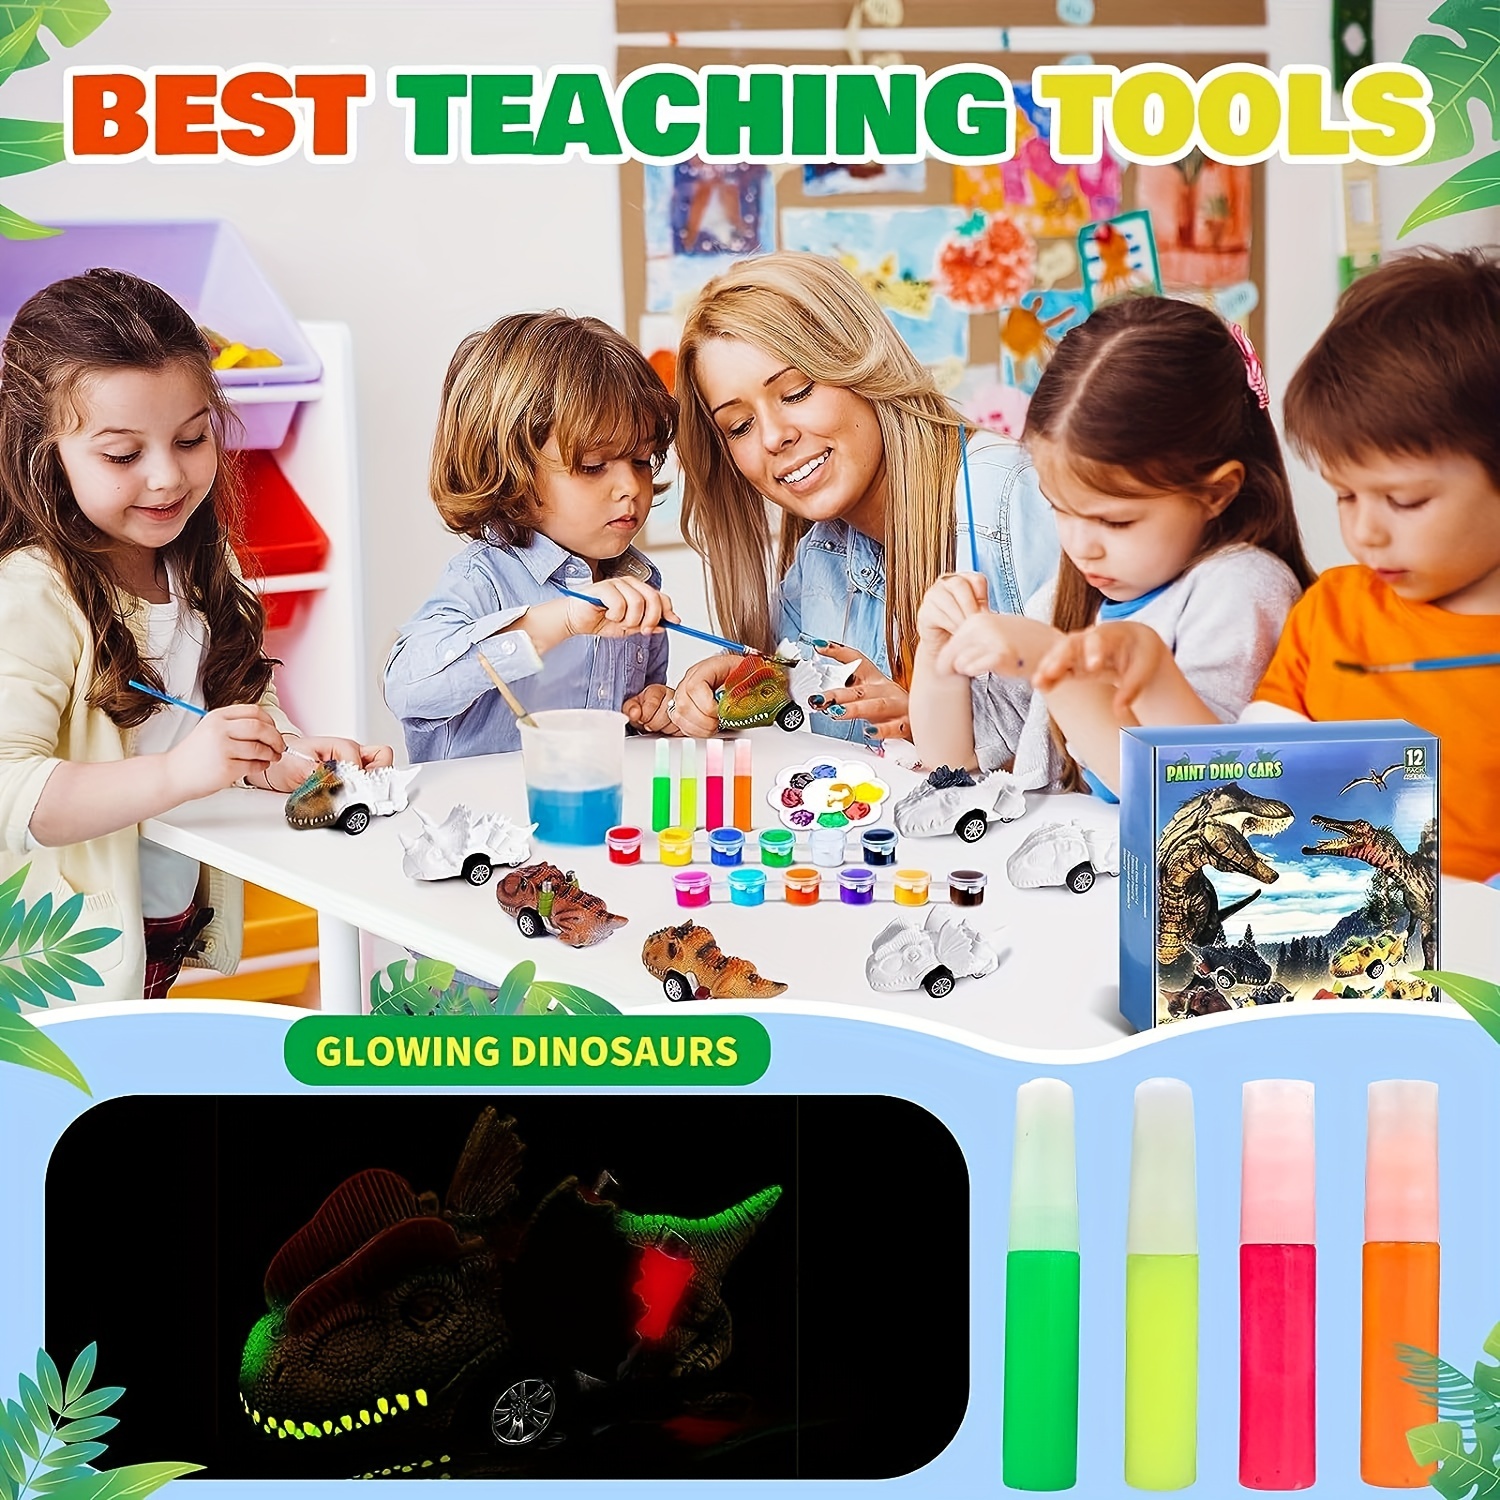 Dinosaur Painting Kit for Kids Ages 4-8 with 2 Dinos - Paint Your Own Wooden Dino Model Kit for Boys 8-12 - Dinosaur Arts & Crafts Gift for Boys 